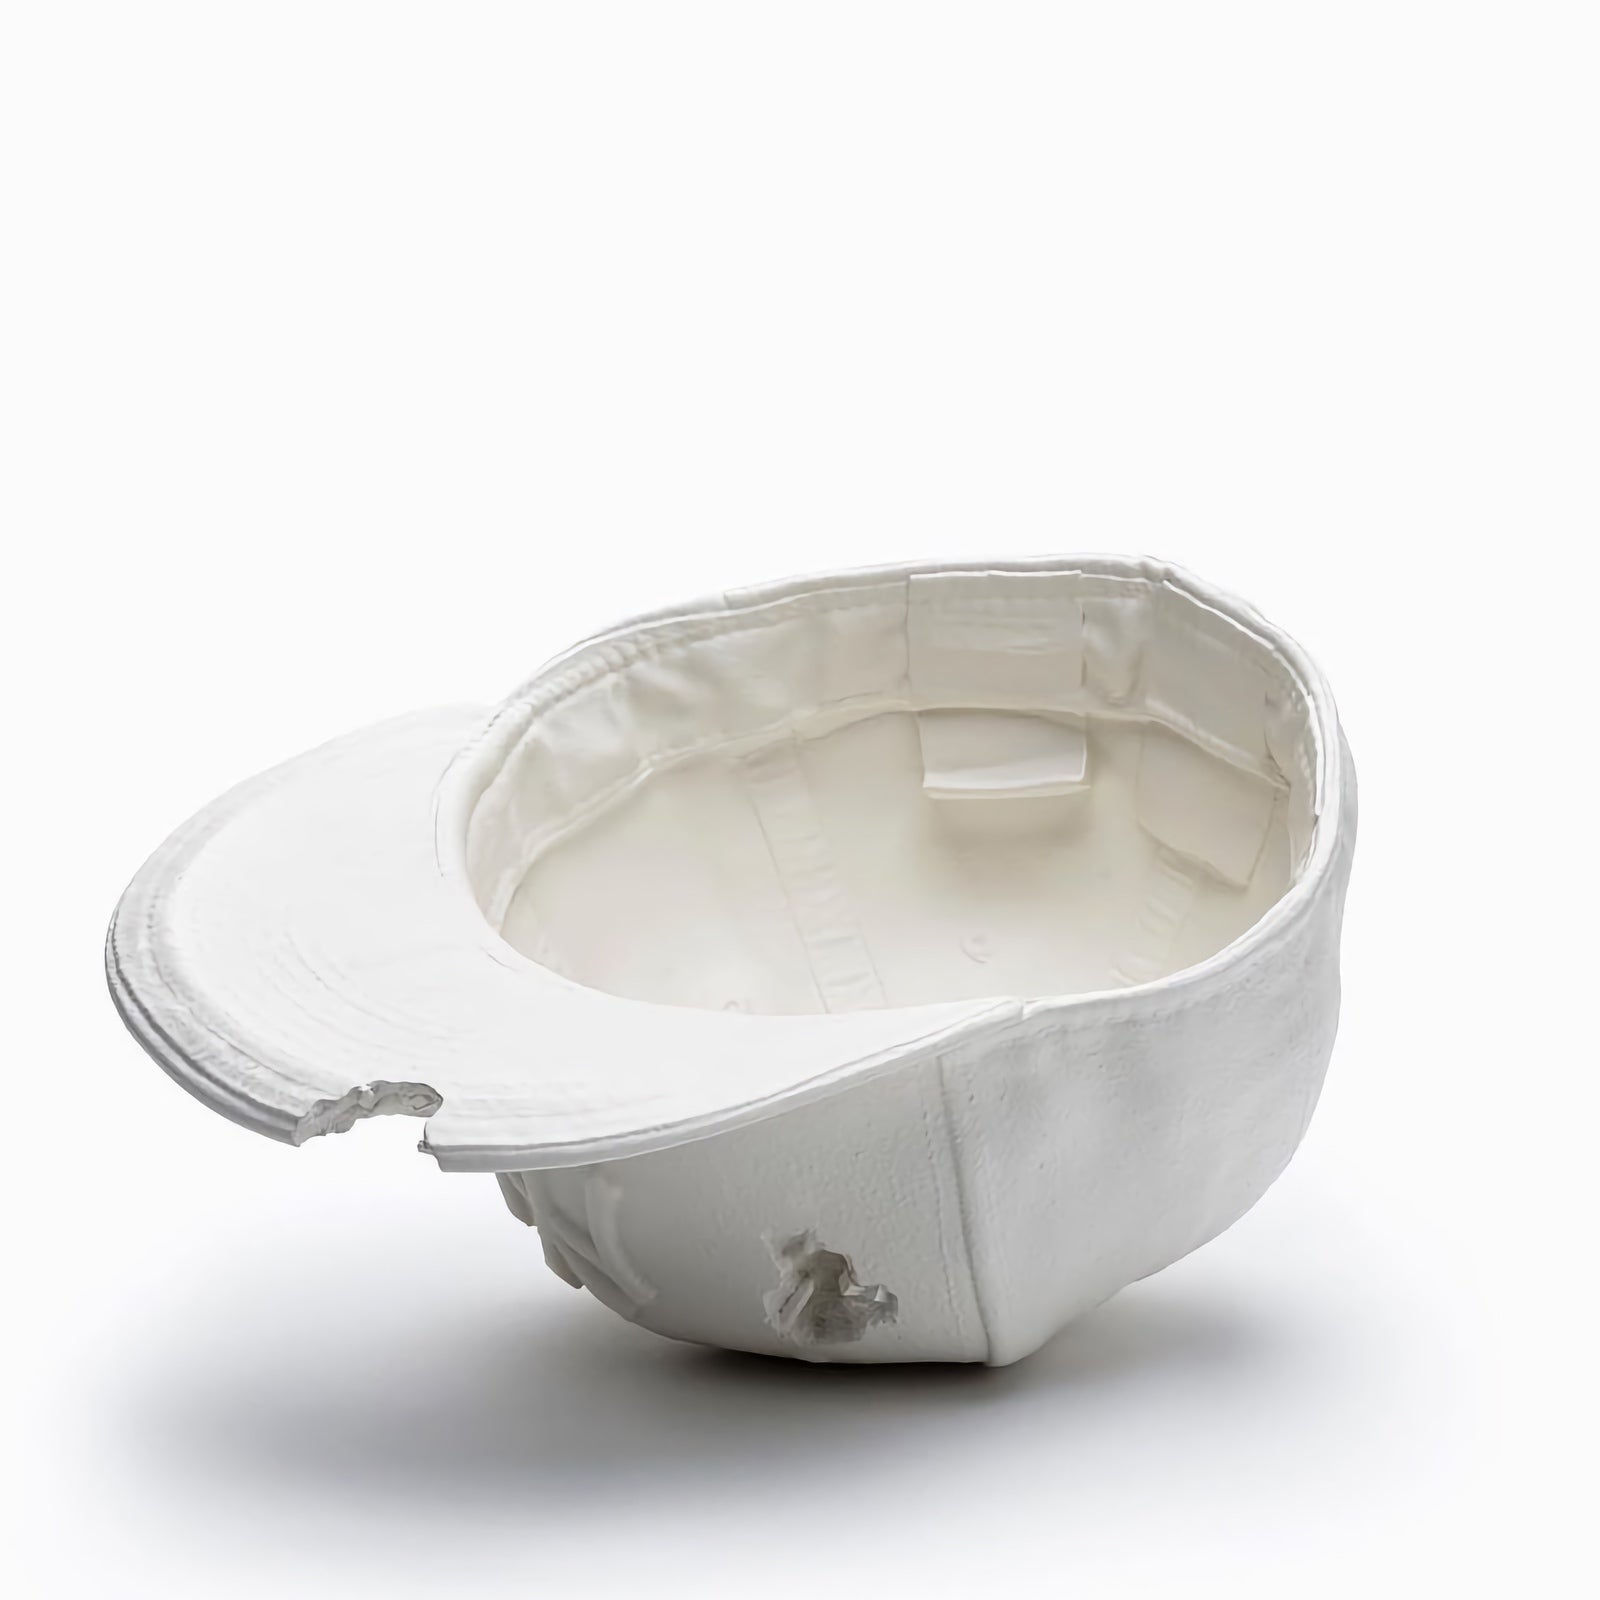 Daniel Arsham x National Gallery of Victoria Modern Artifact 001, 2021 5 x 7.67 x 7.67 in / 2.87 lbs Edition of 500  In celebration of NGV Triennial 2020, the NGV has collaborated with artist Daniel Arsham on a limited-edition exclusive to the NGV design store.